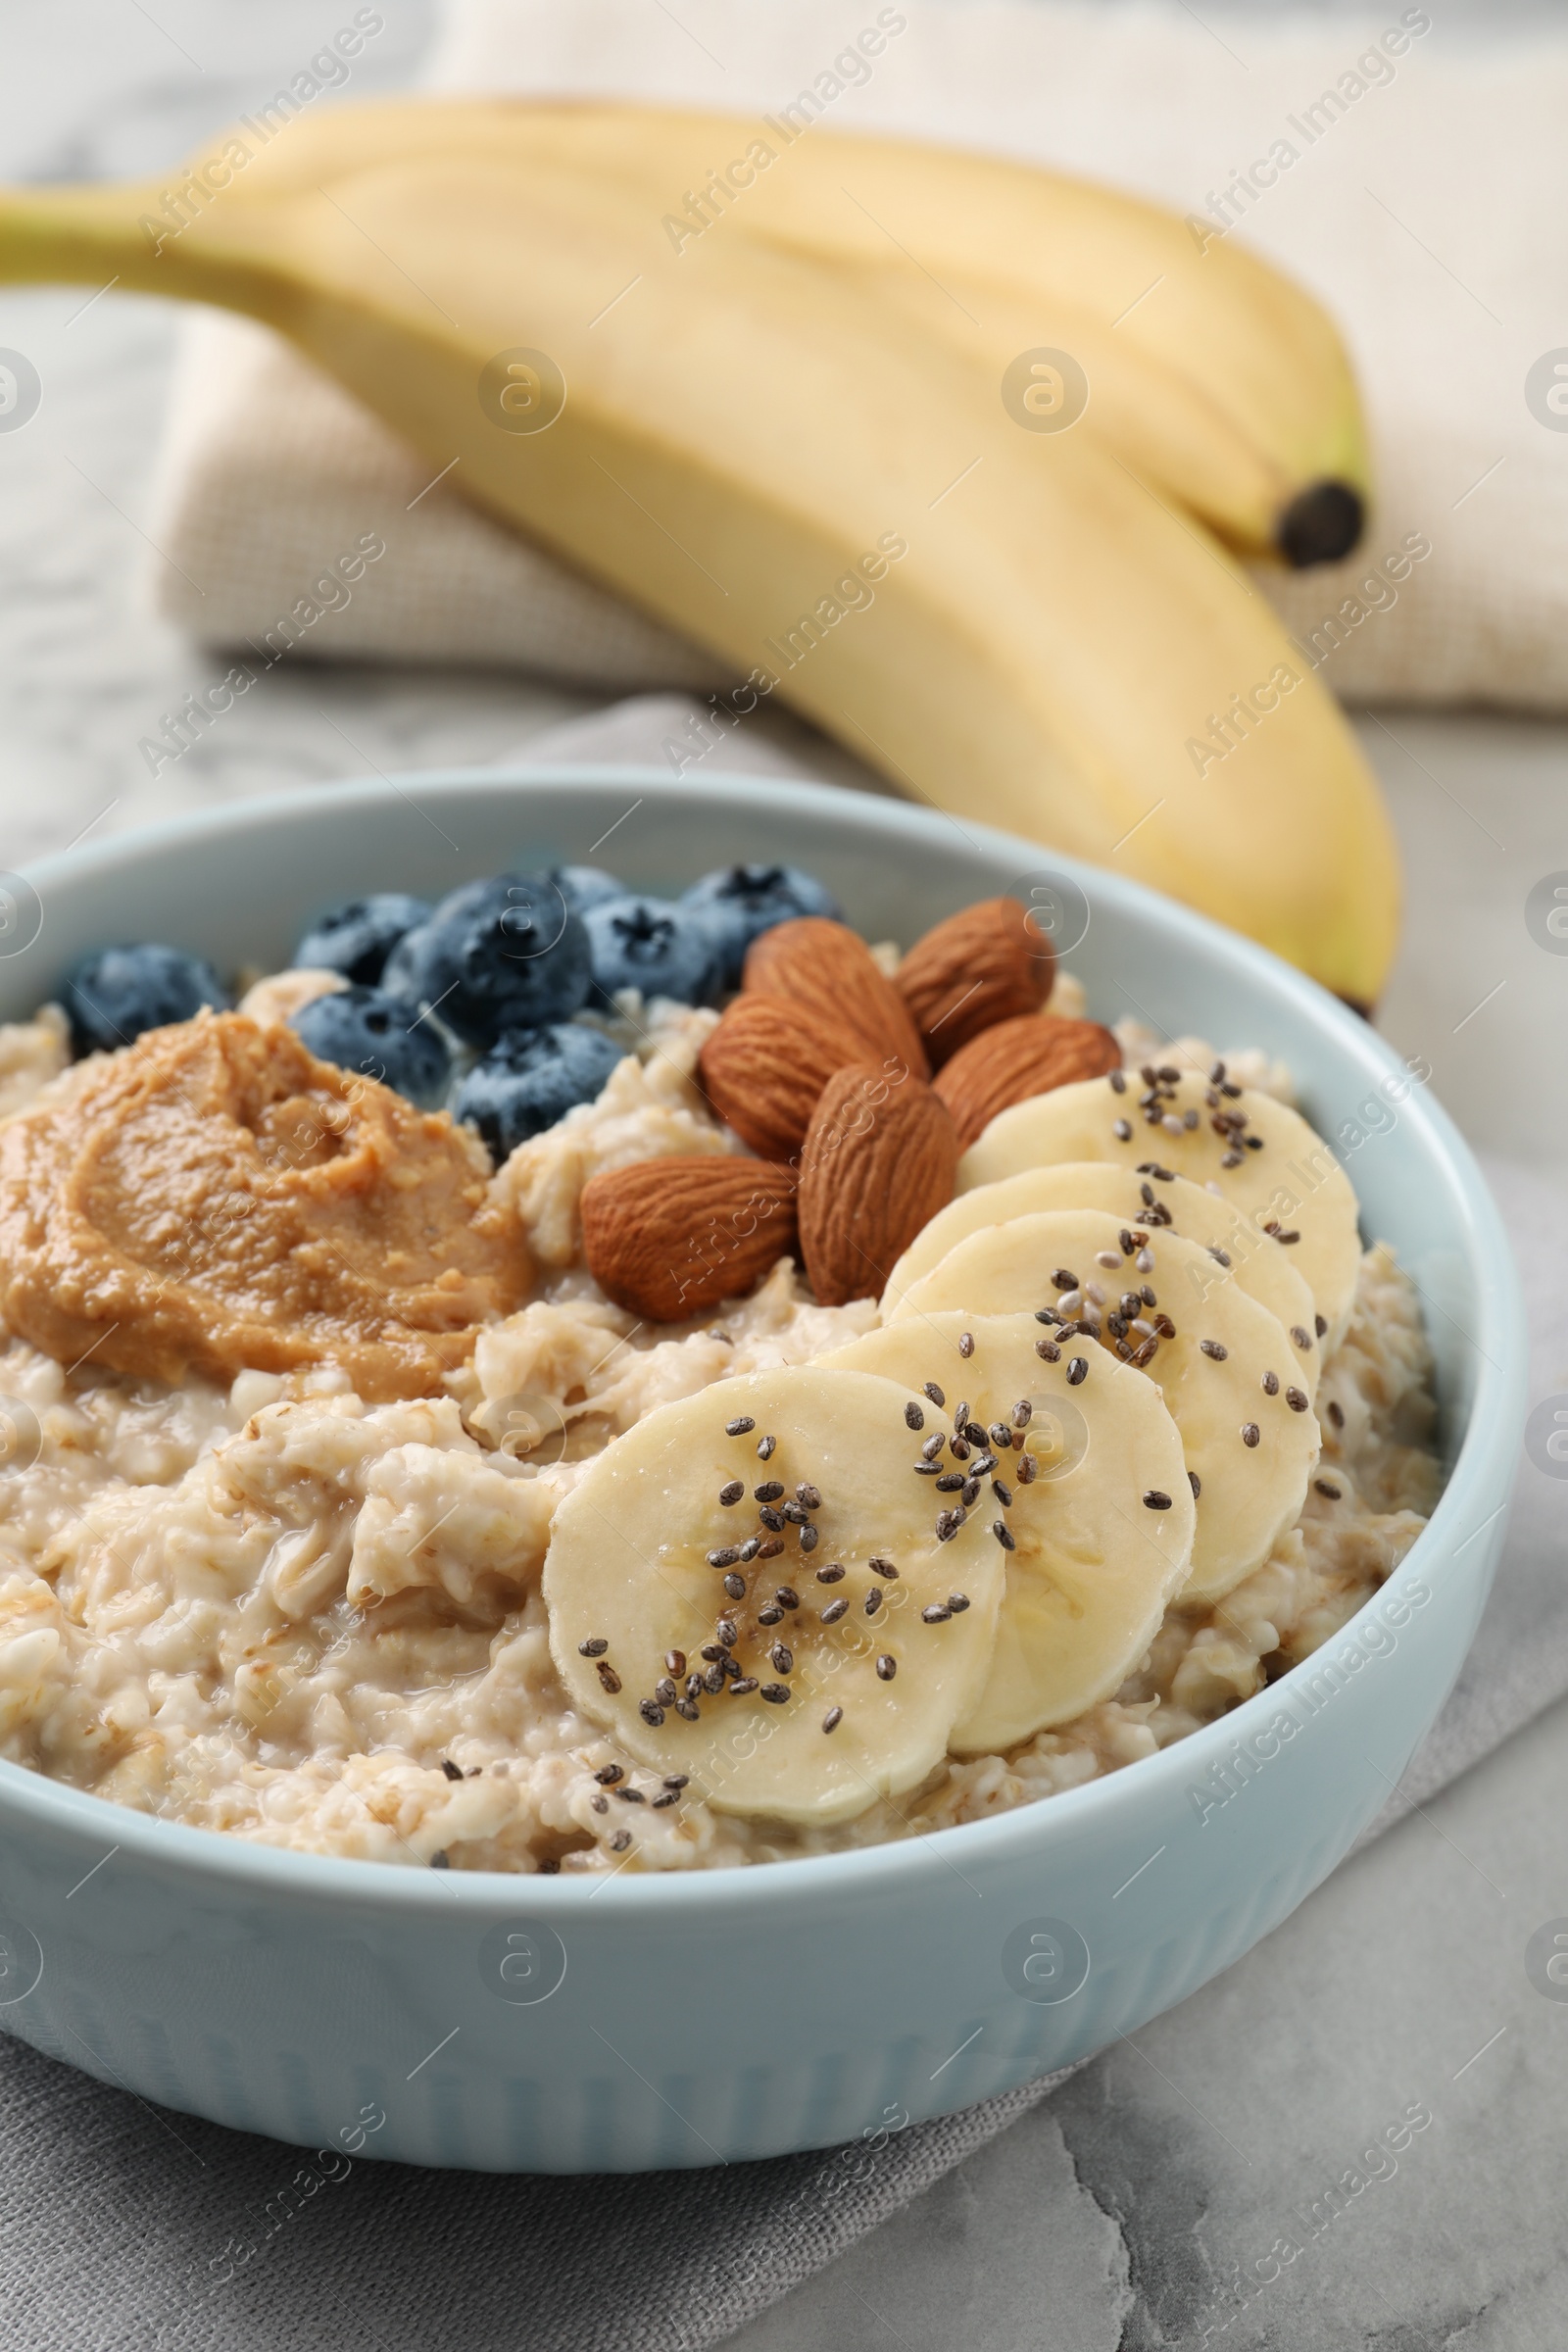 Photo of Tasty oatmeal porridge with toppings in bowl on table, closeup